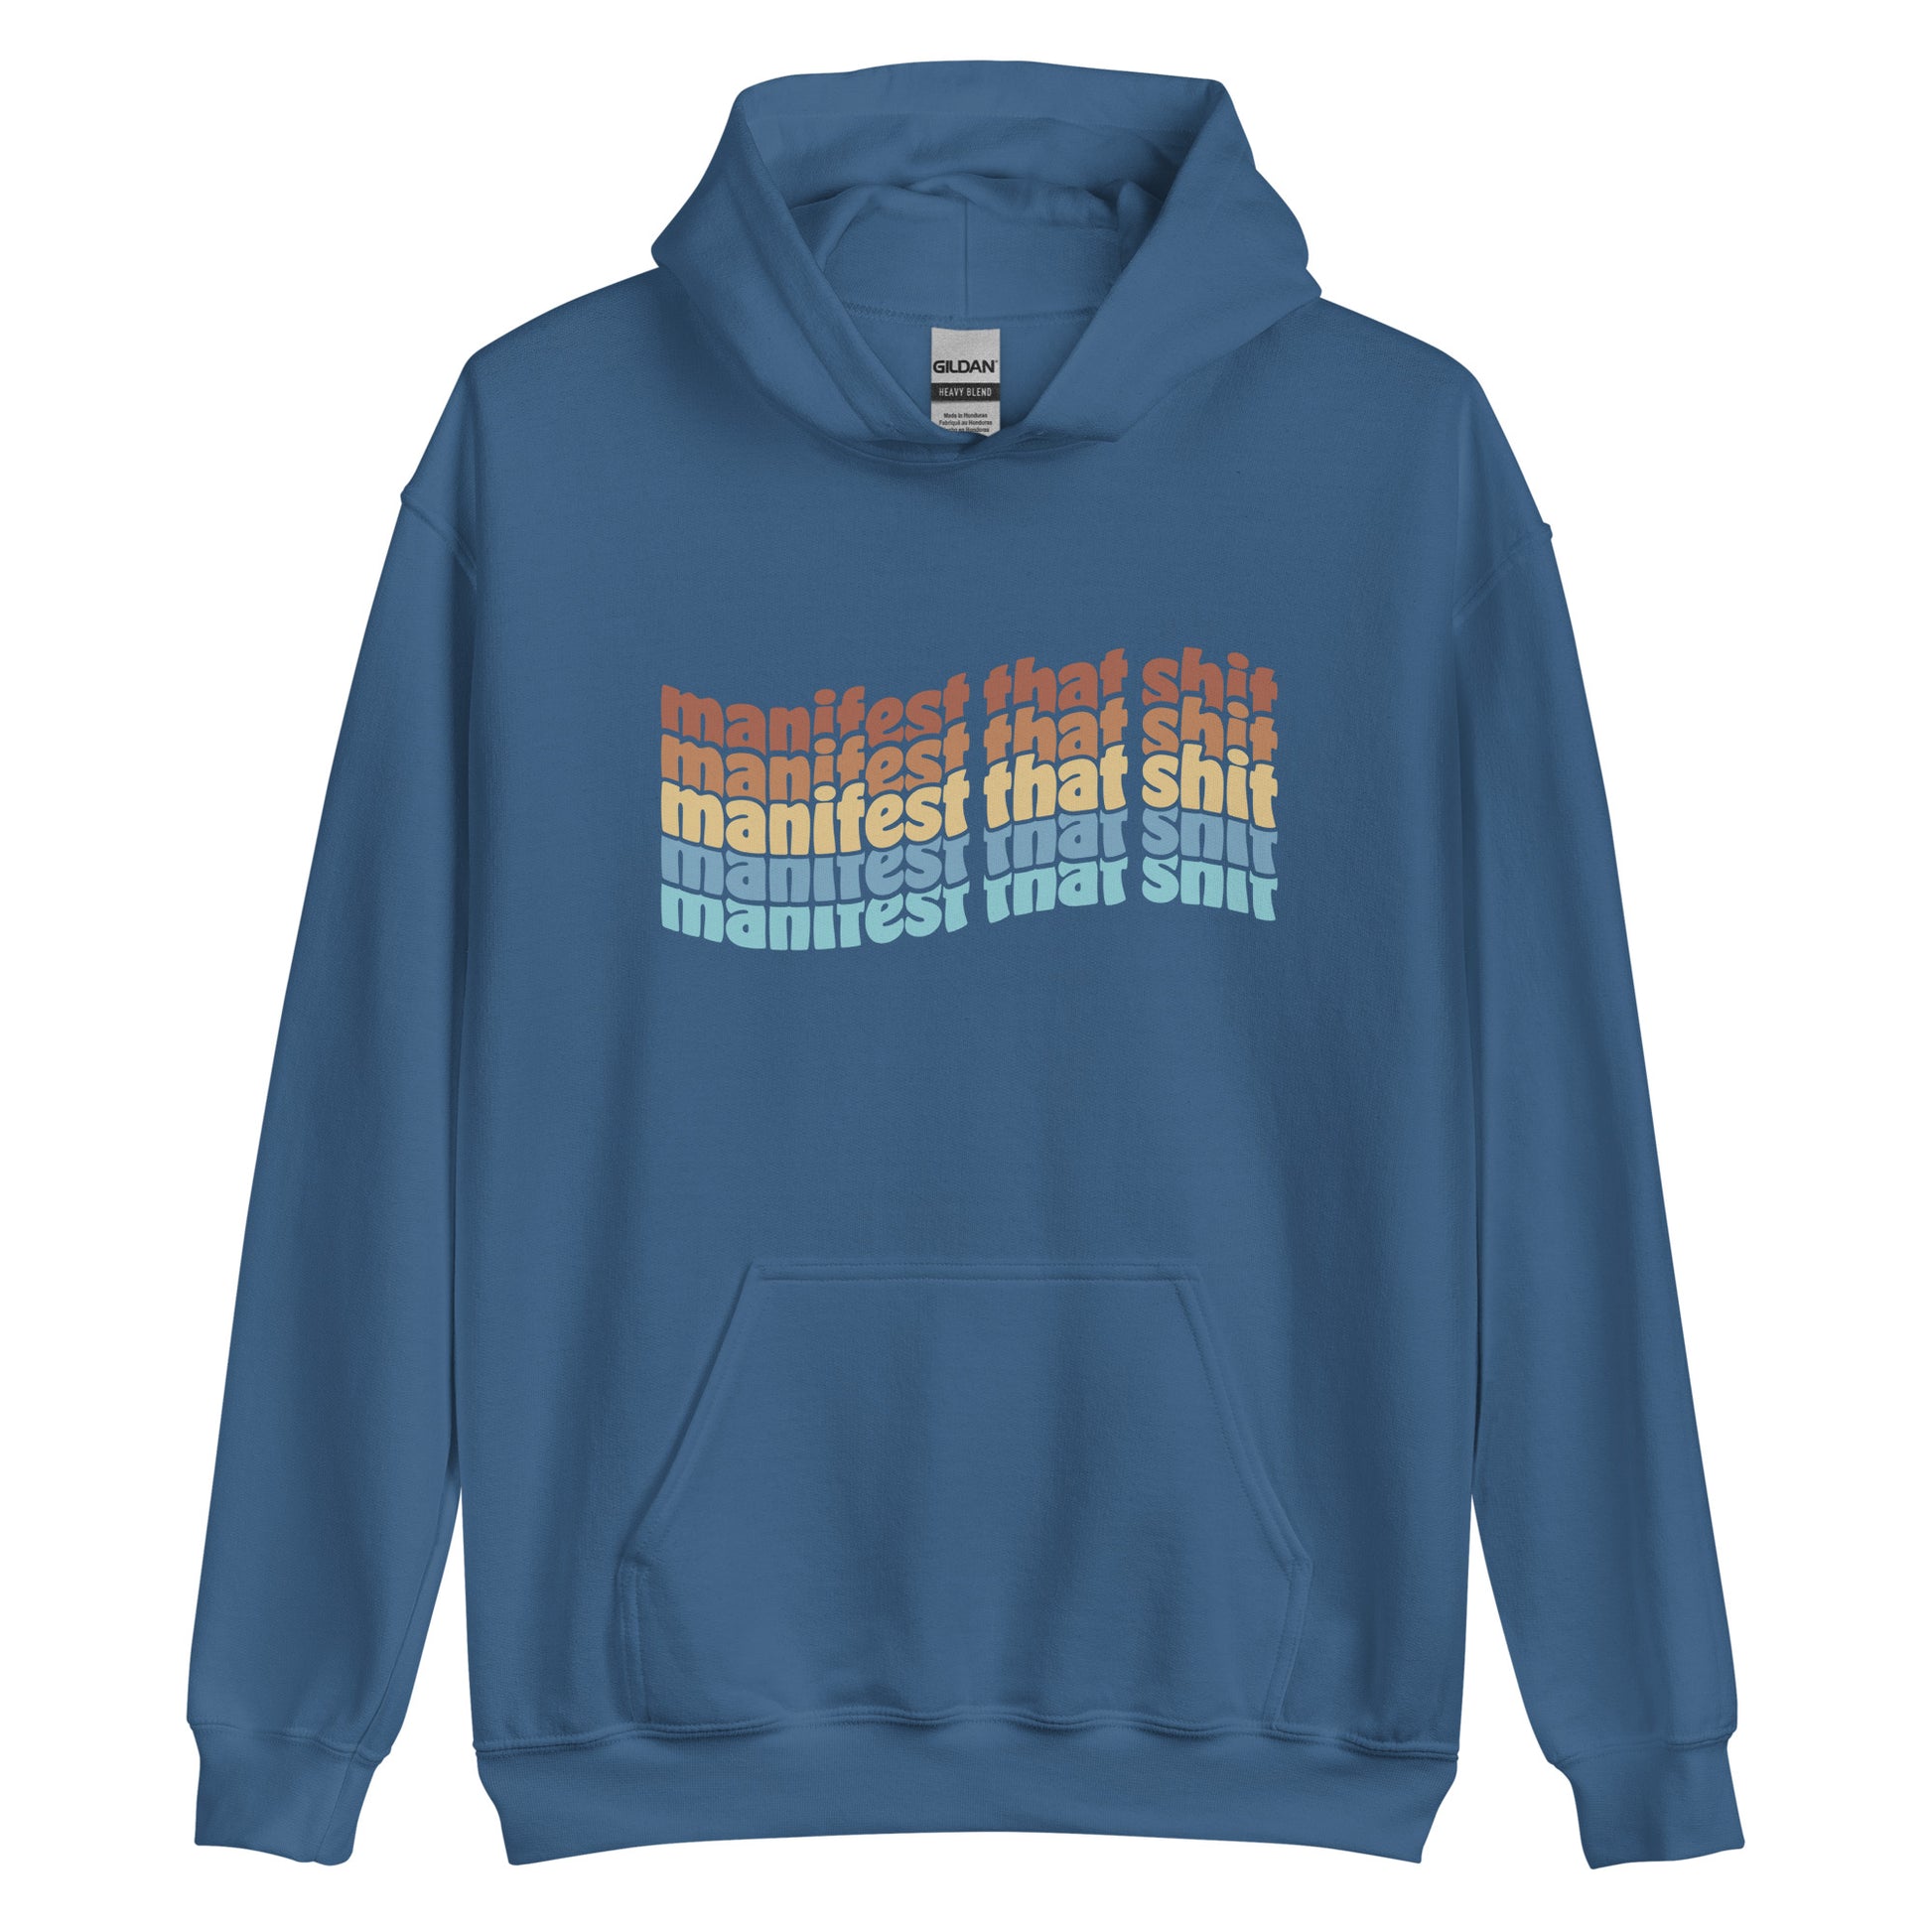 A blue hooded sweatshirt featuring stacked text that reads "manifest that shit" in a rainbow of colors.